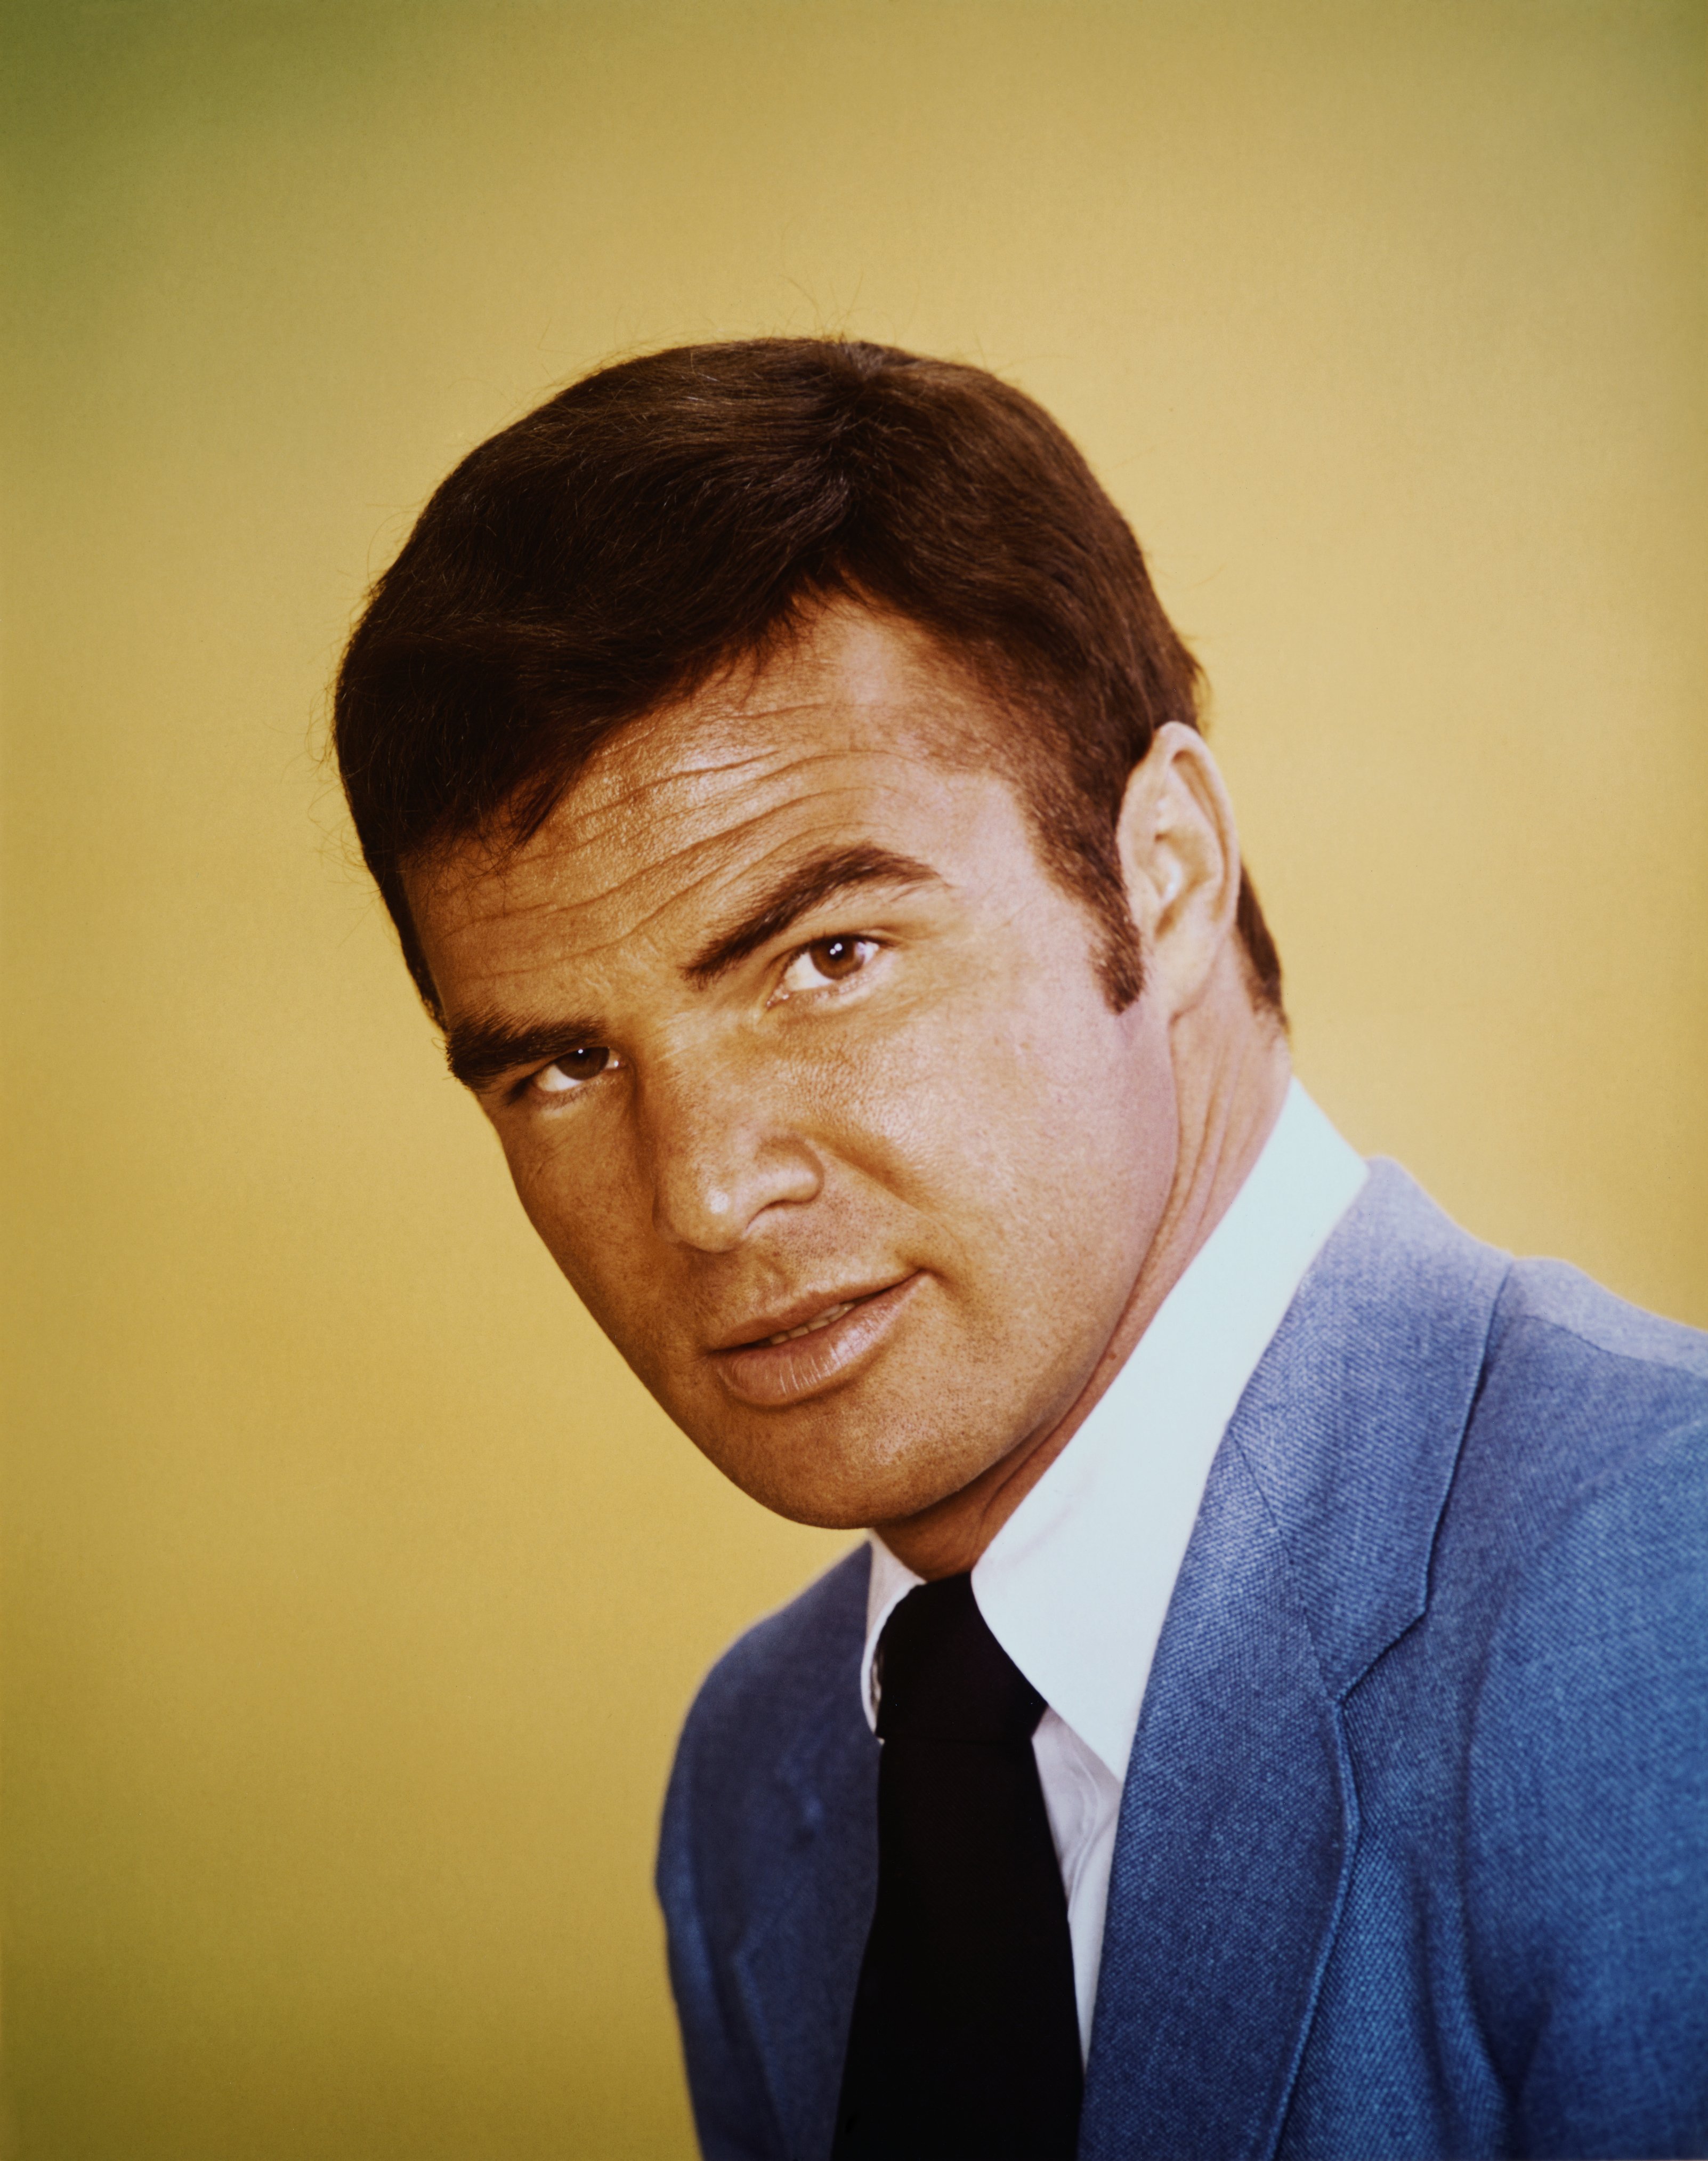 American Actor, Burt Reynolds photographed: | Source: Getty Images